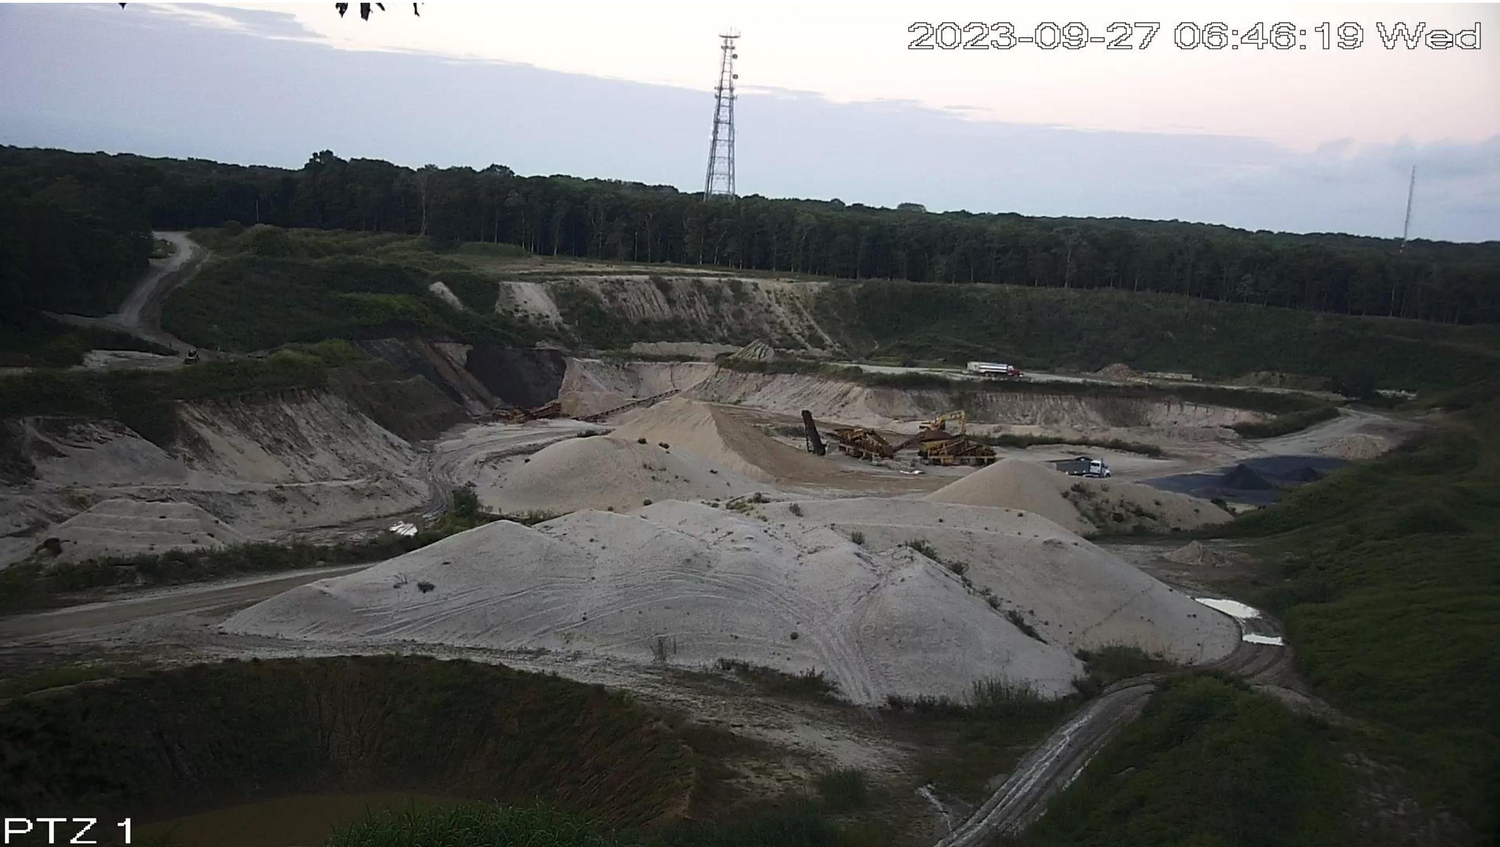 Photographs from a neighboring property show mining activity continuing at the Sand Land mine in Noyac after court orders requiring it to stop.